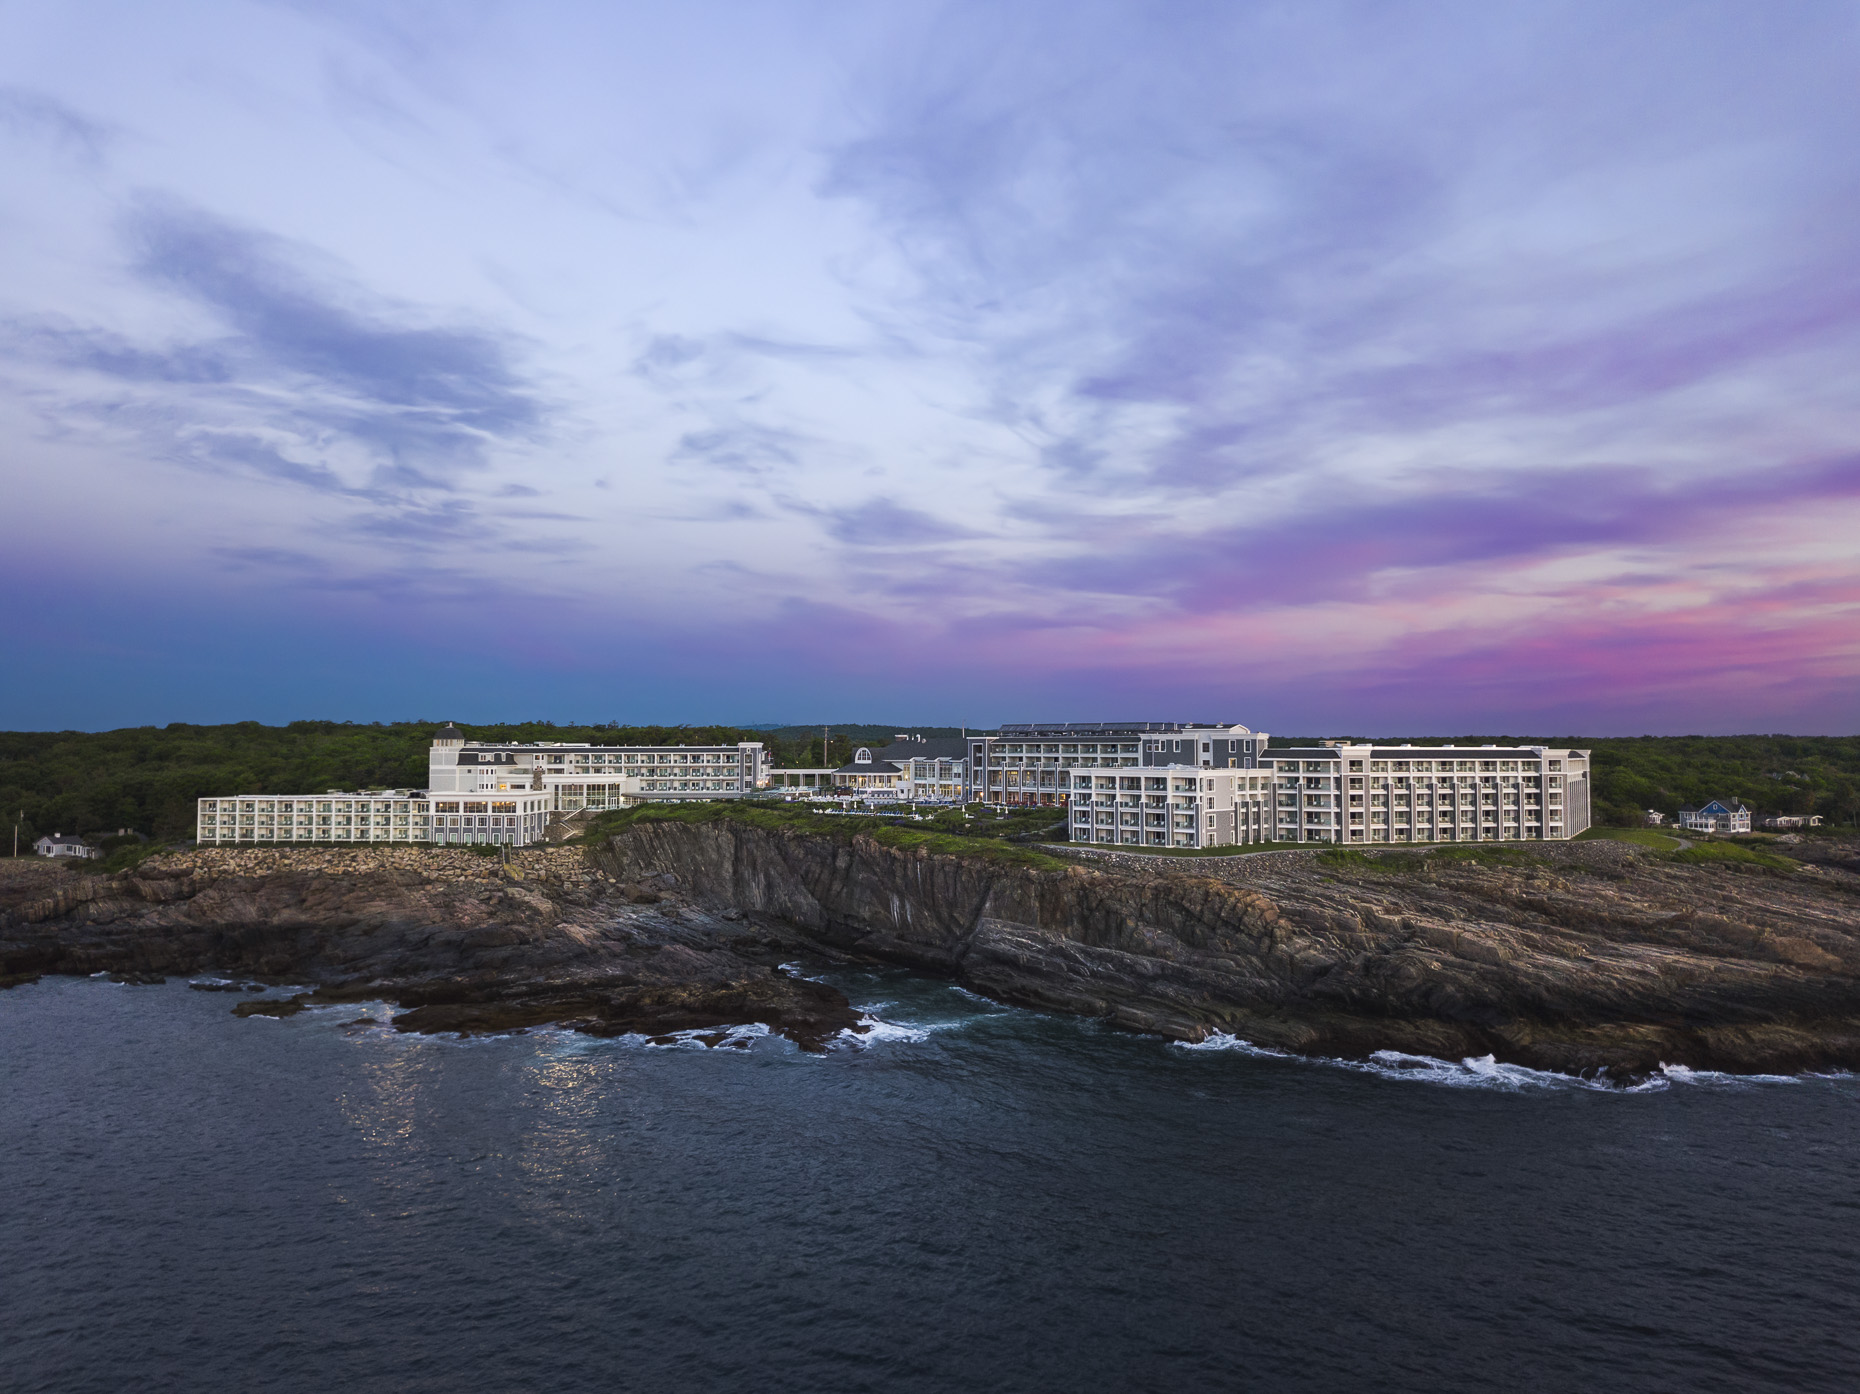 Cliff House Resort & Spa by Cooper Carry photographed by Brad Feinknopf based in Columbus, Ohio